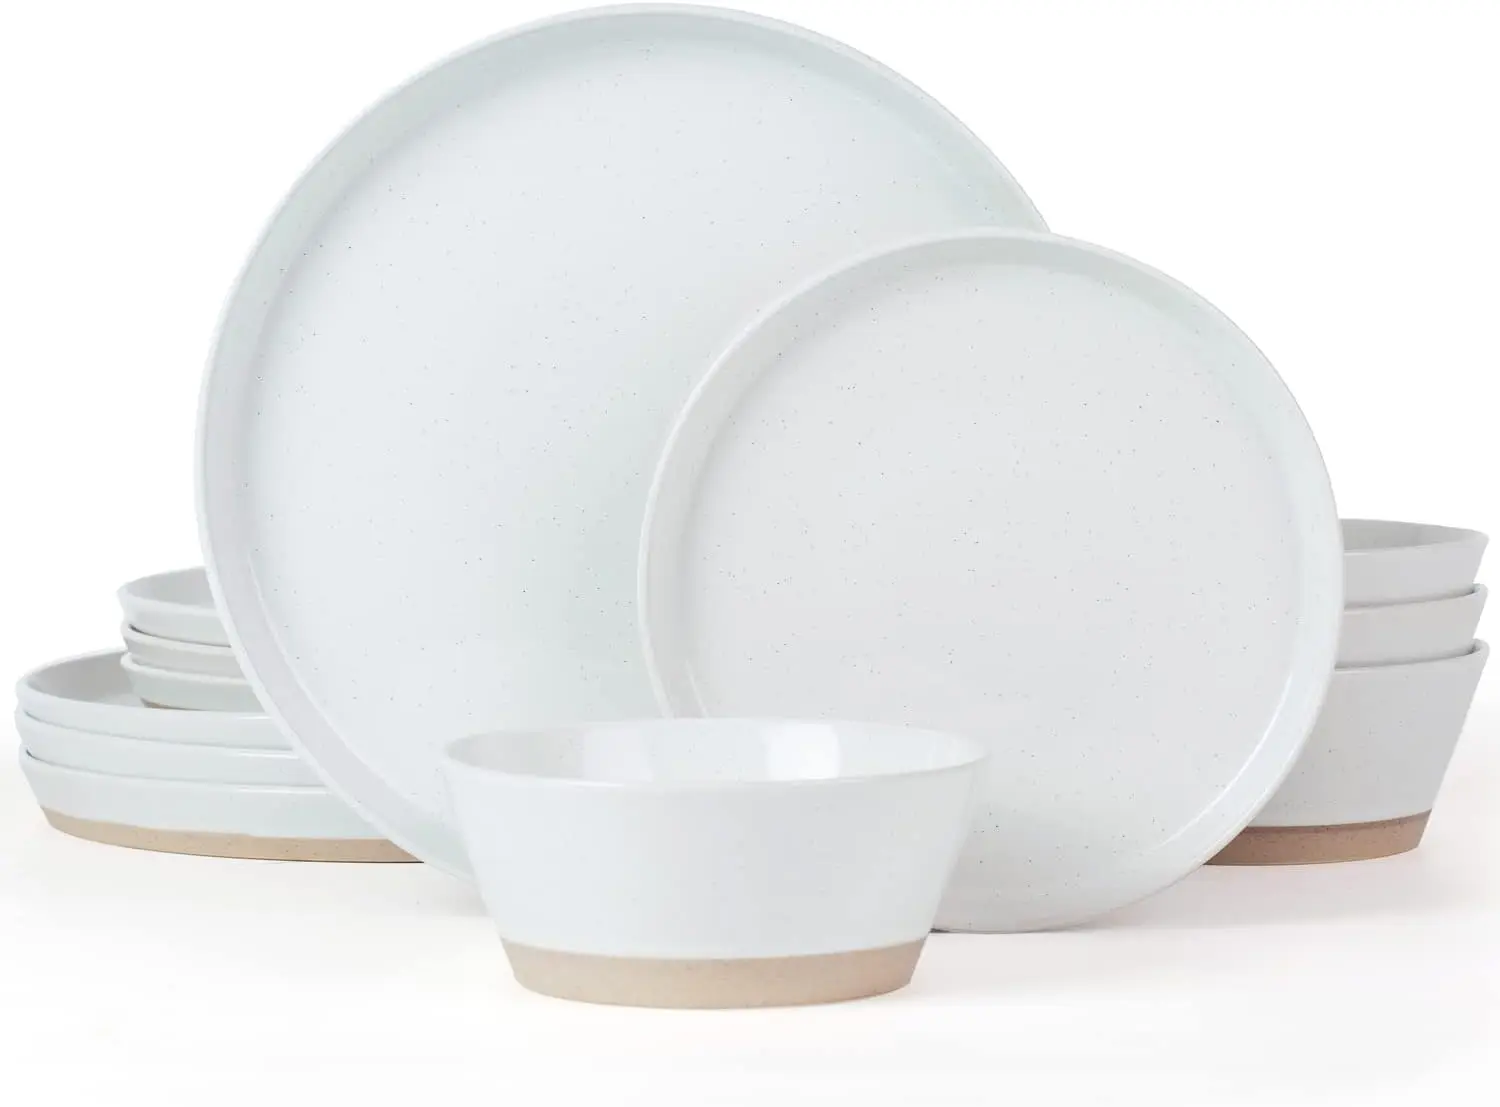 

Famiware Saturn Dinnerware Sets, 12 Piece Dish Set, Plates and Bowls Sets for 4, White